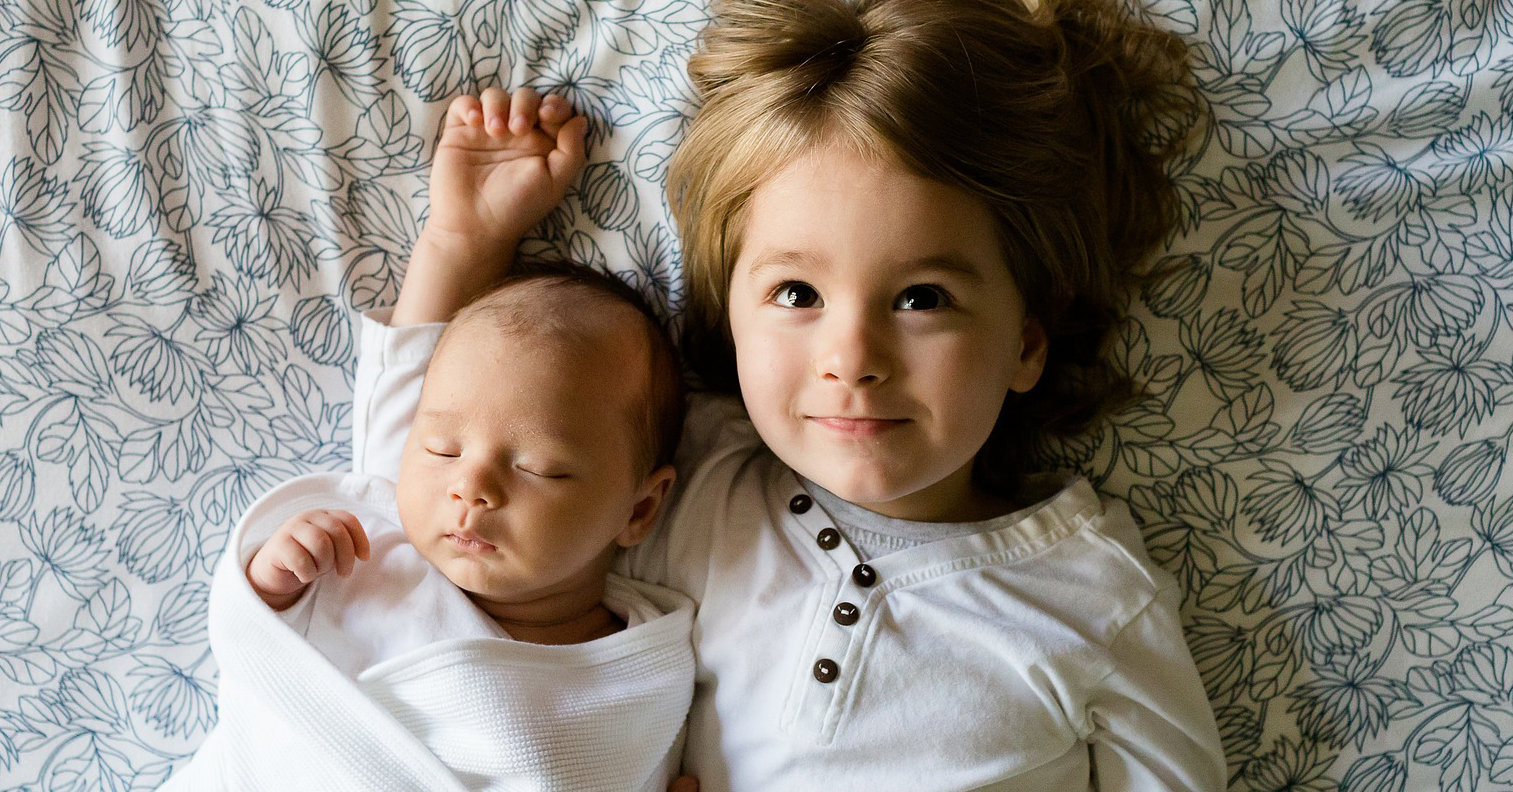 Child Tax Credit - Toddler and newborn brothers laying on a bed sleeping and smiling